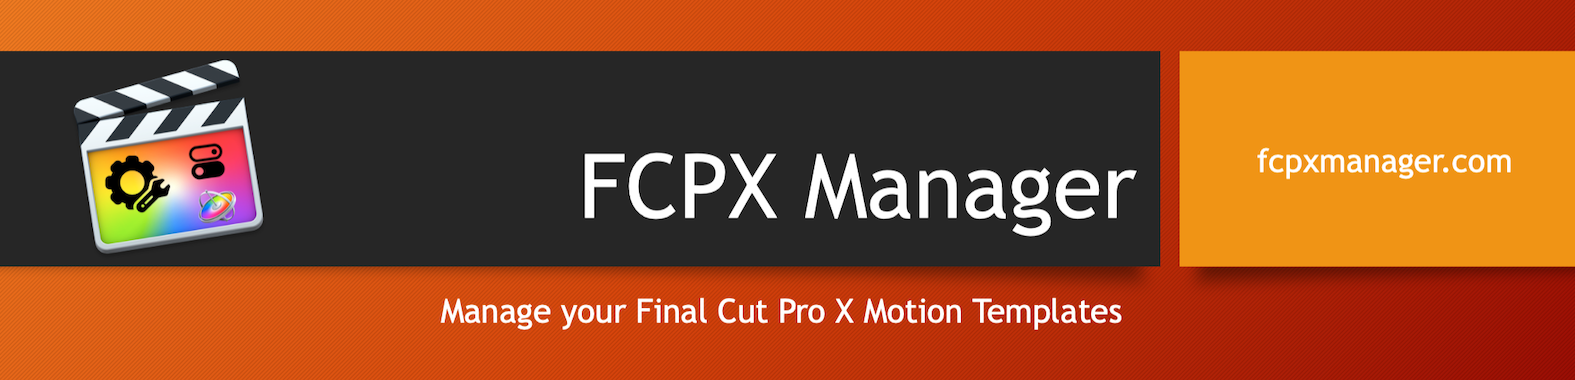  Return to FCPX Manager main site